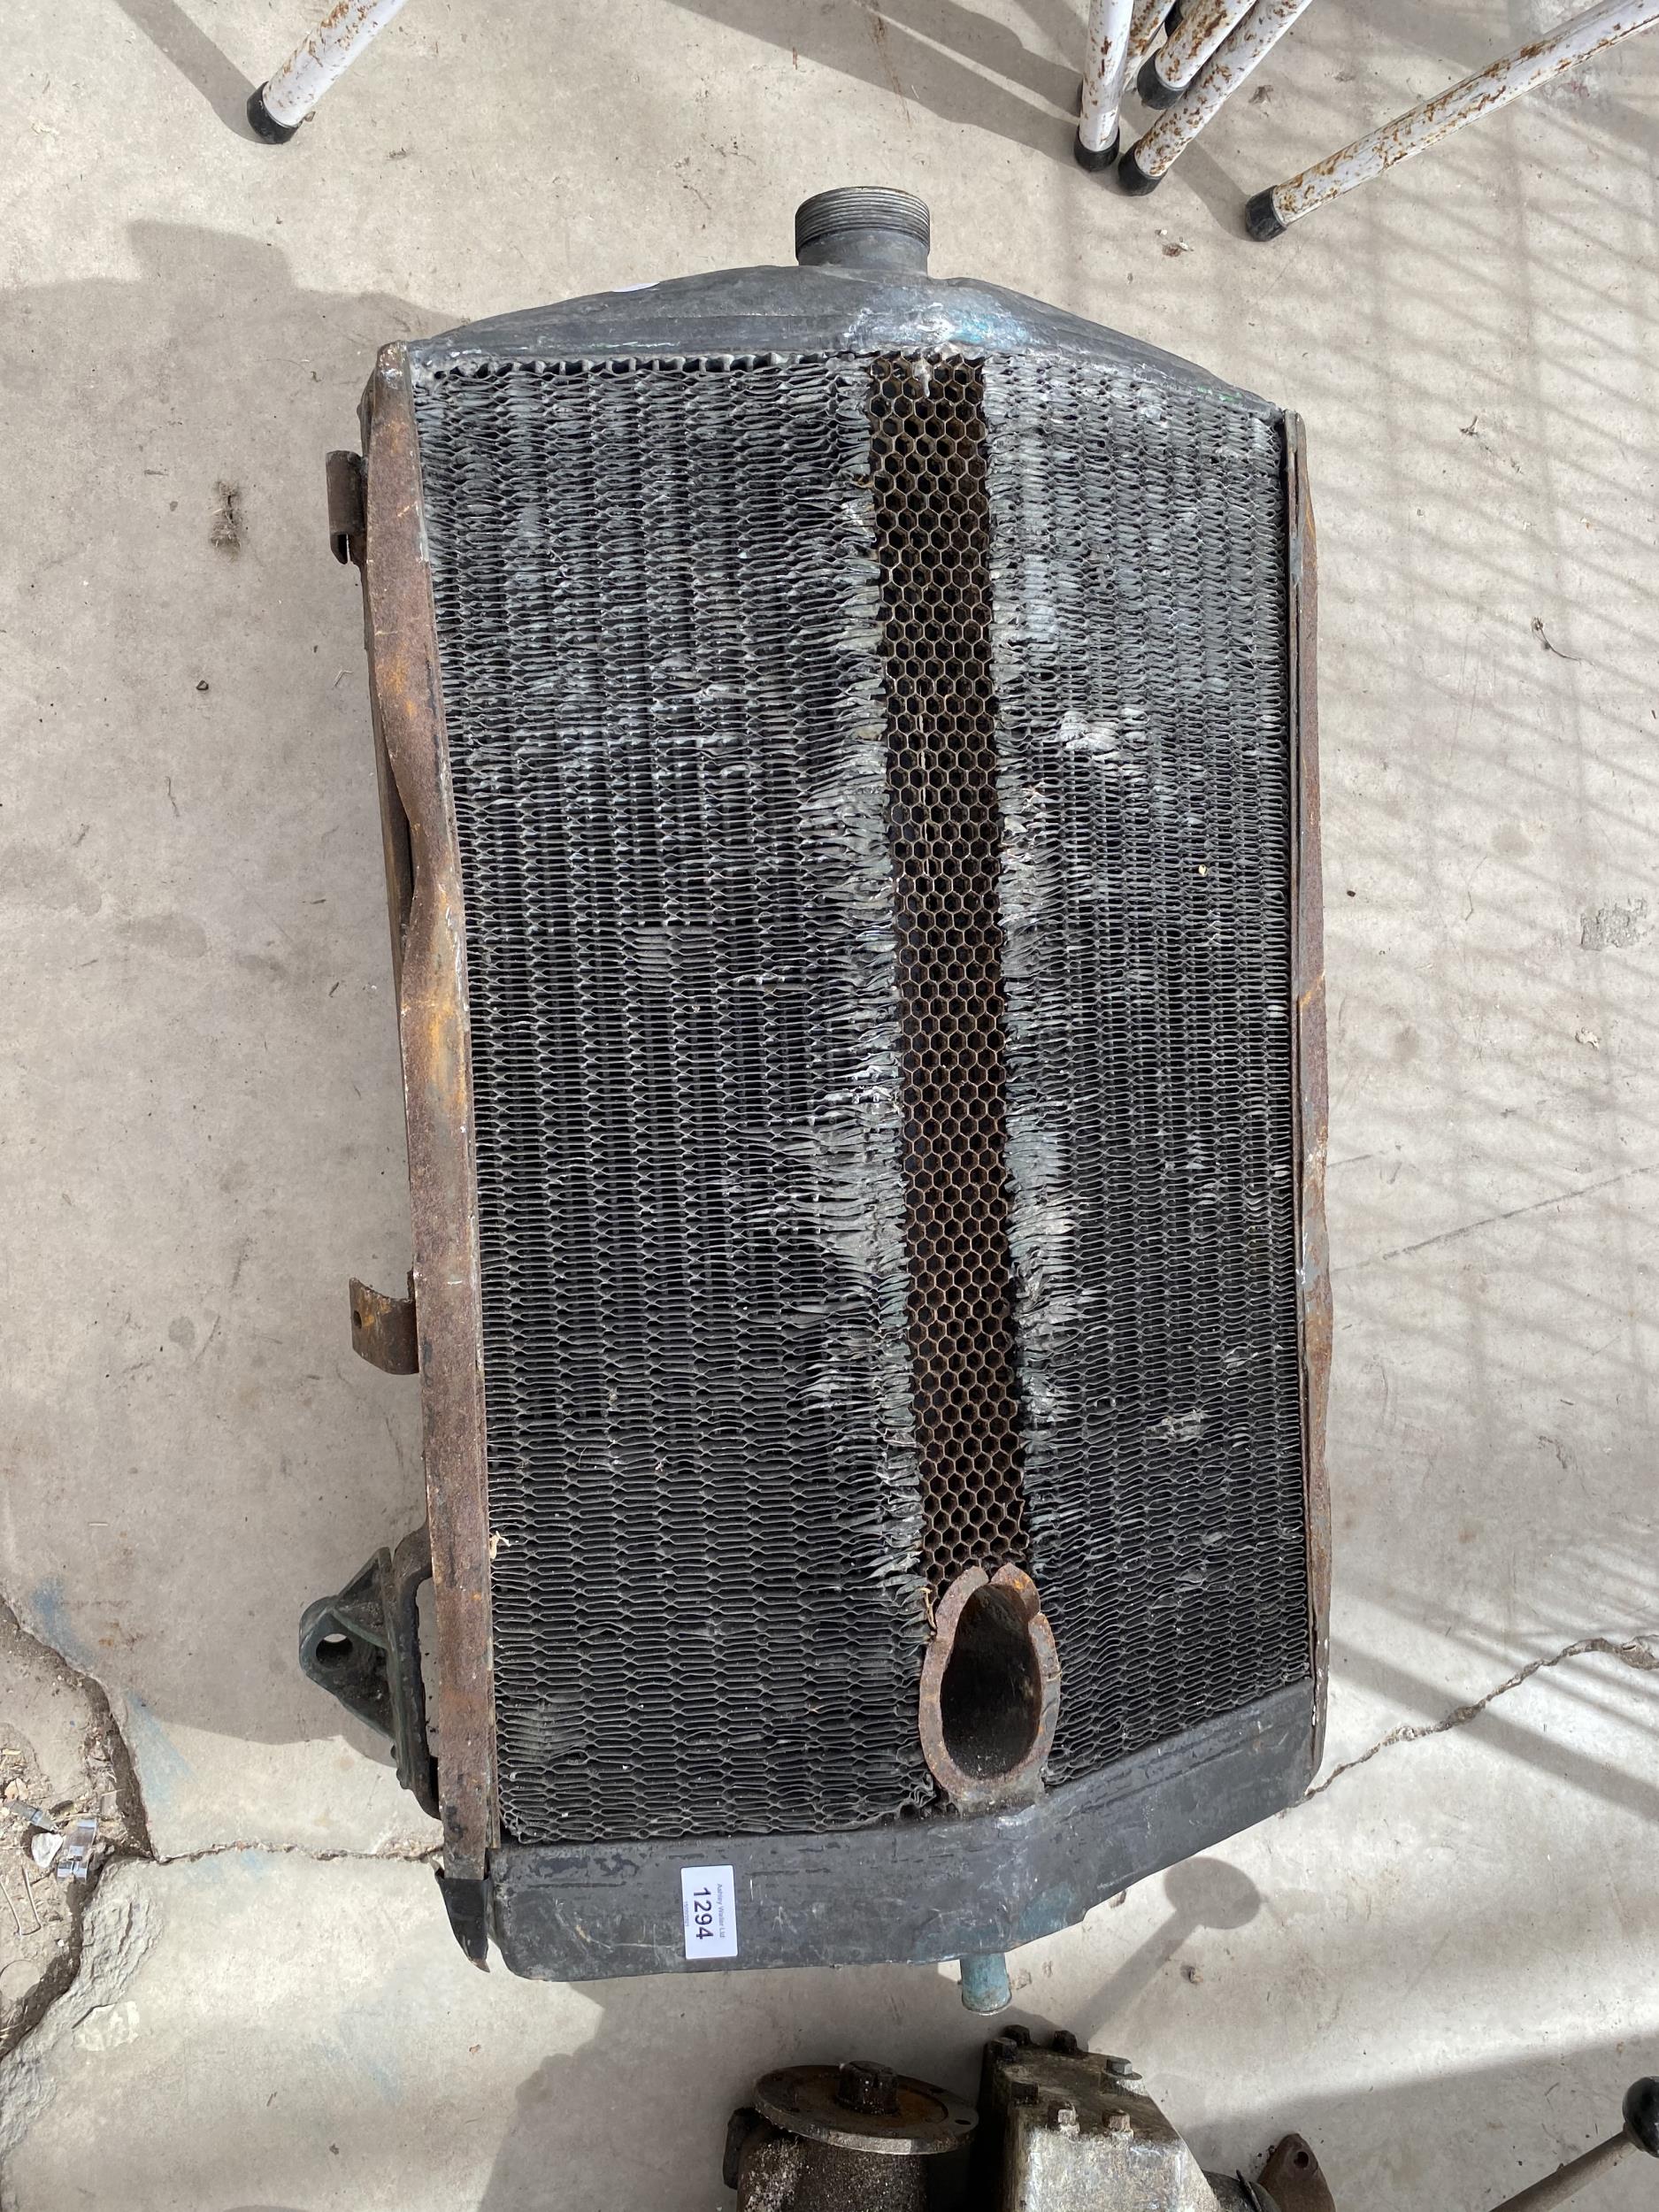 A VINTAGE CAR RADIATOR BELIEVED TO BE FROM A 51 ALVIS